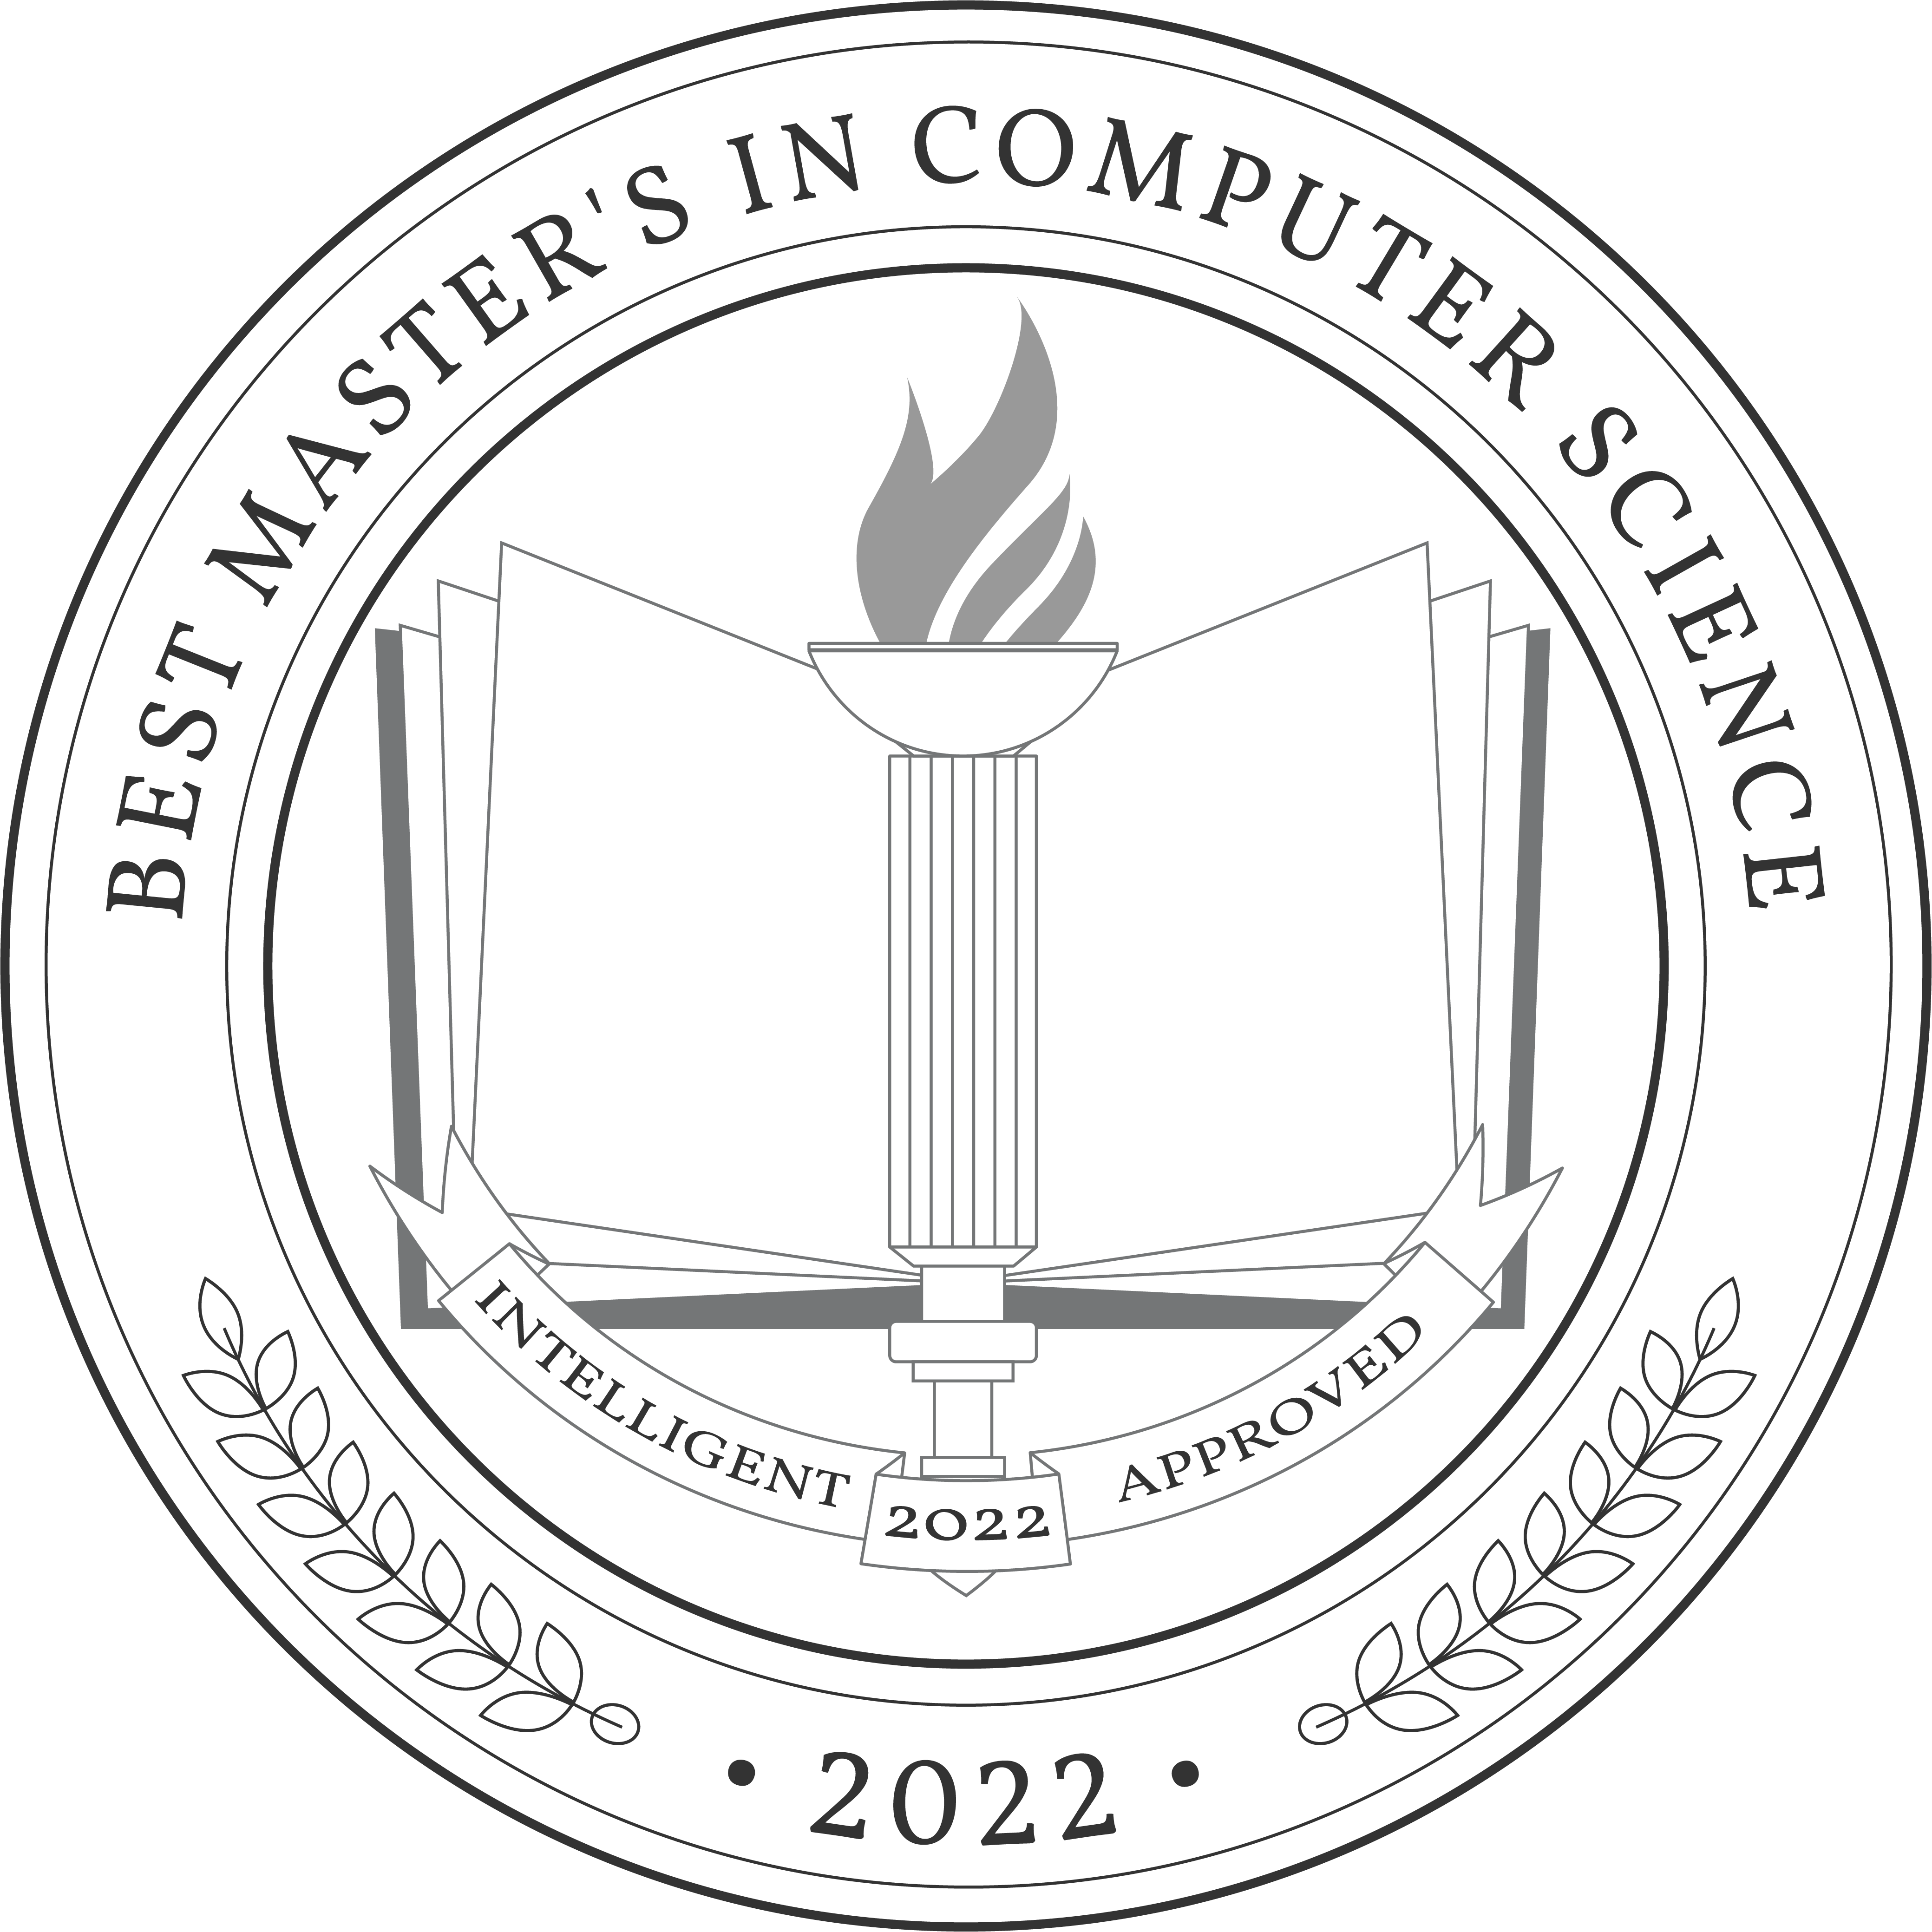 Best Master's in Computer Science Degree Programs